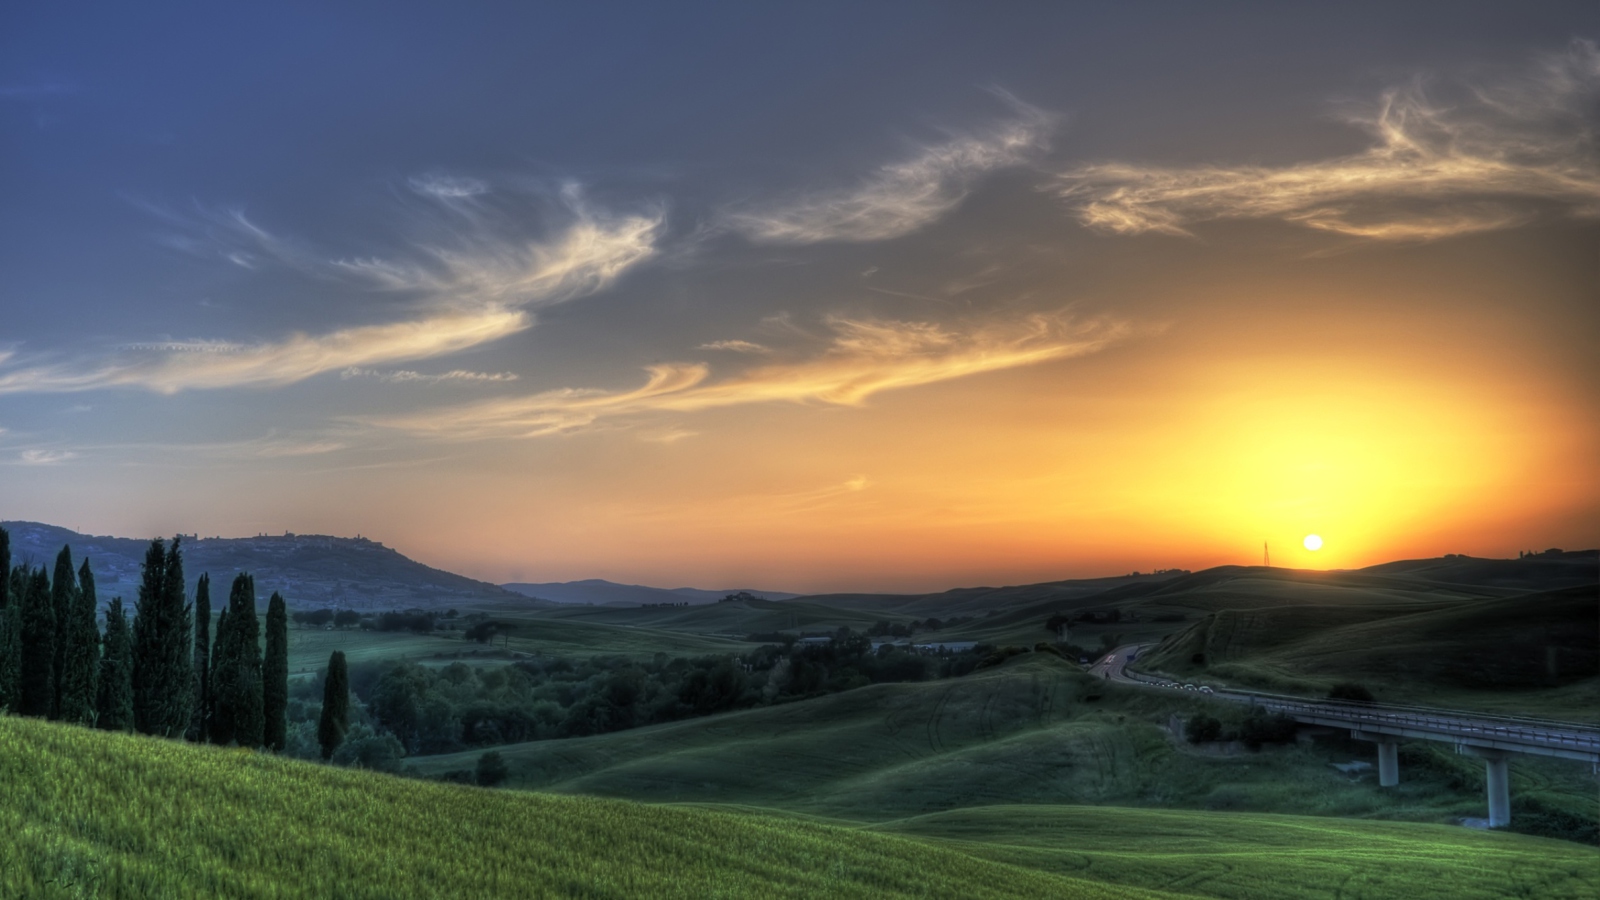 Sunset In Tuscany wallpaper 1600x900